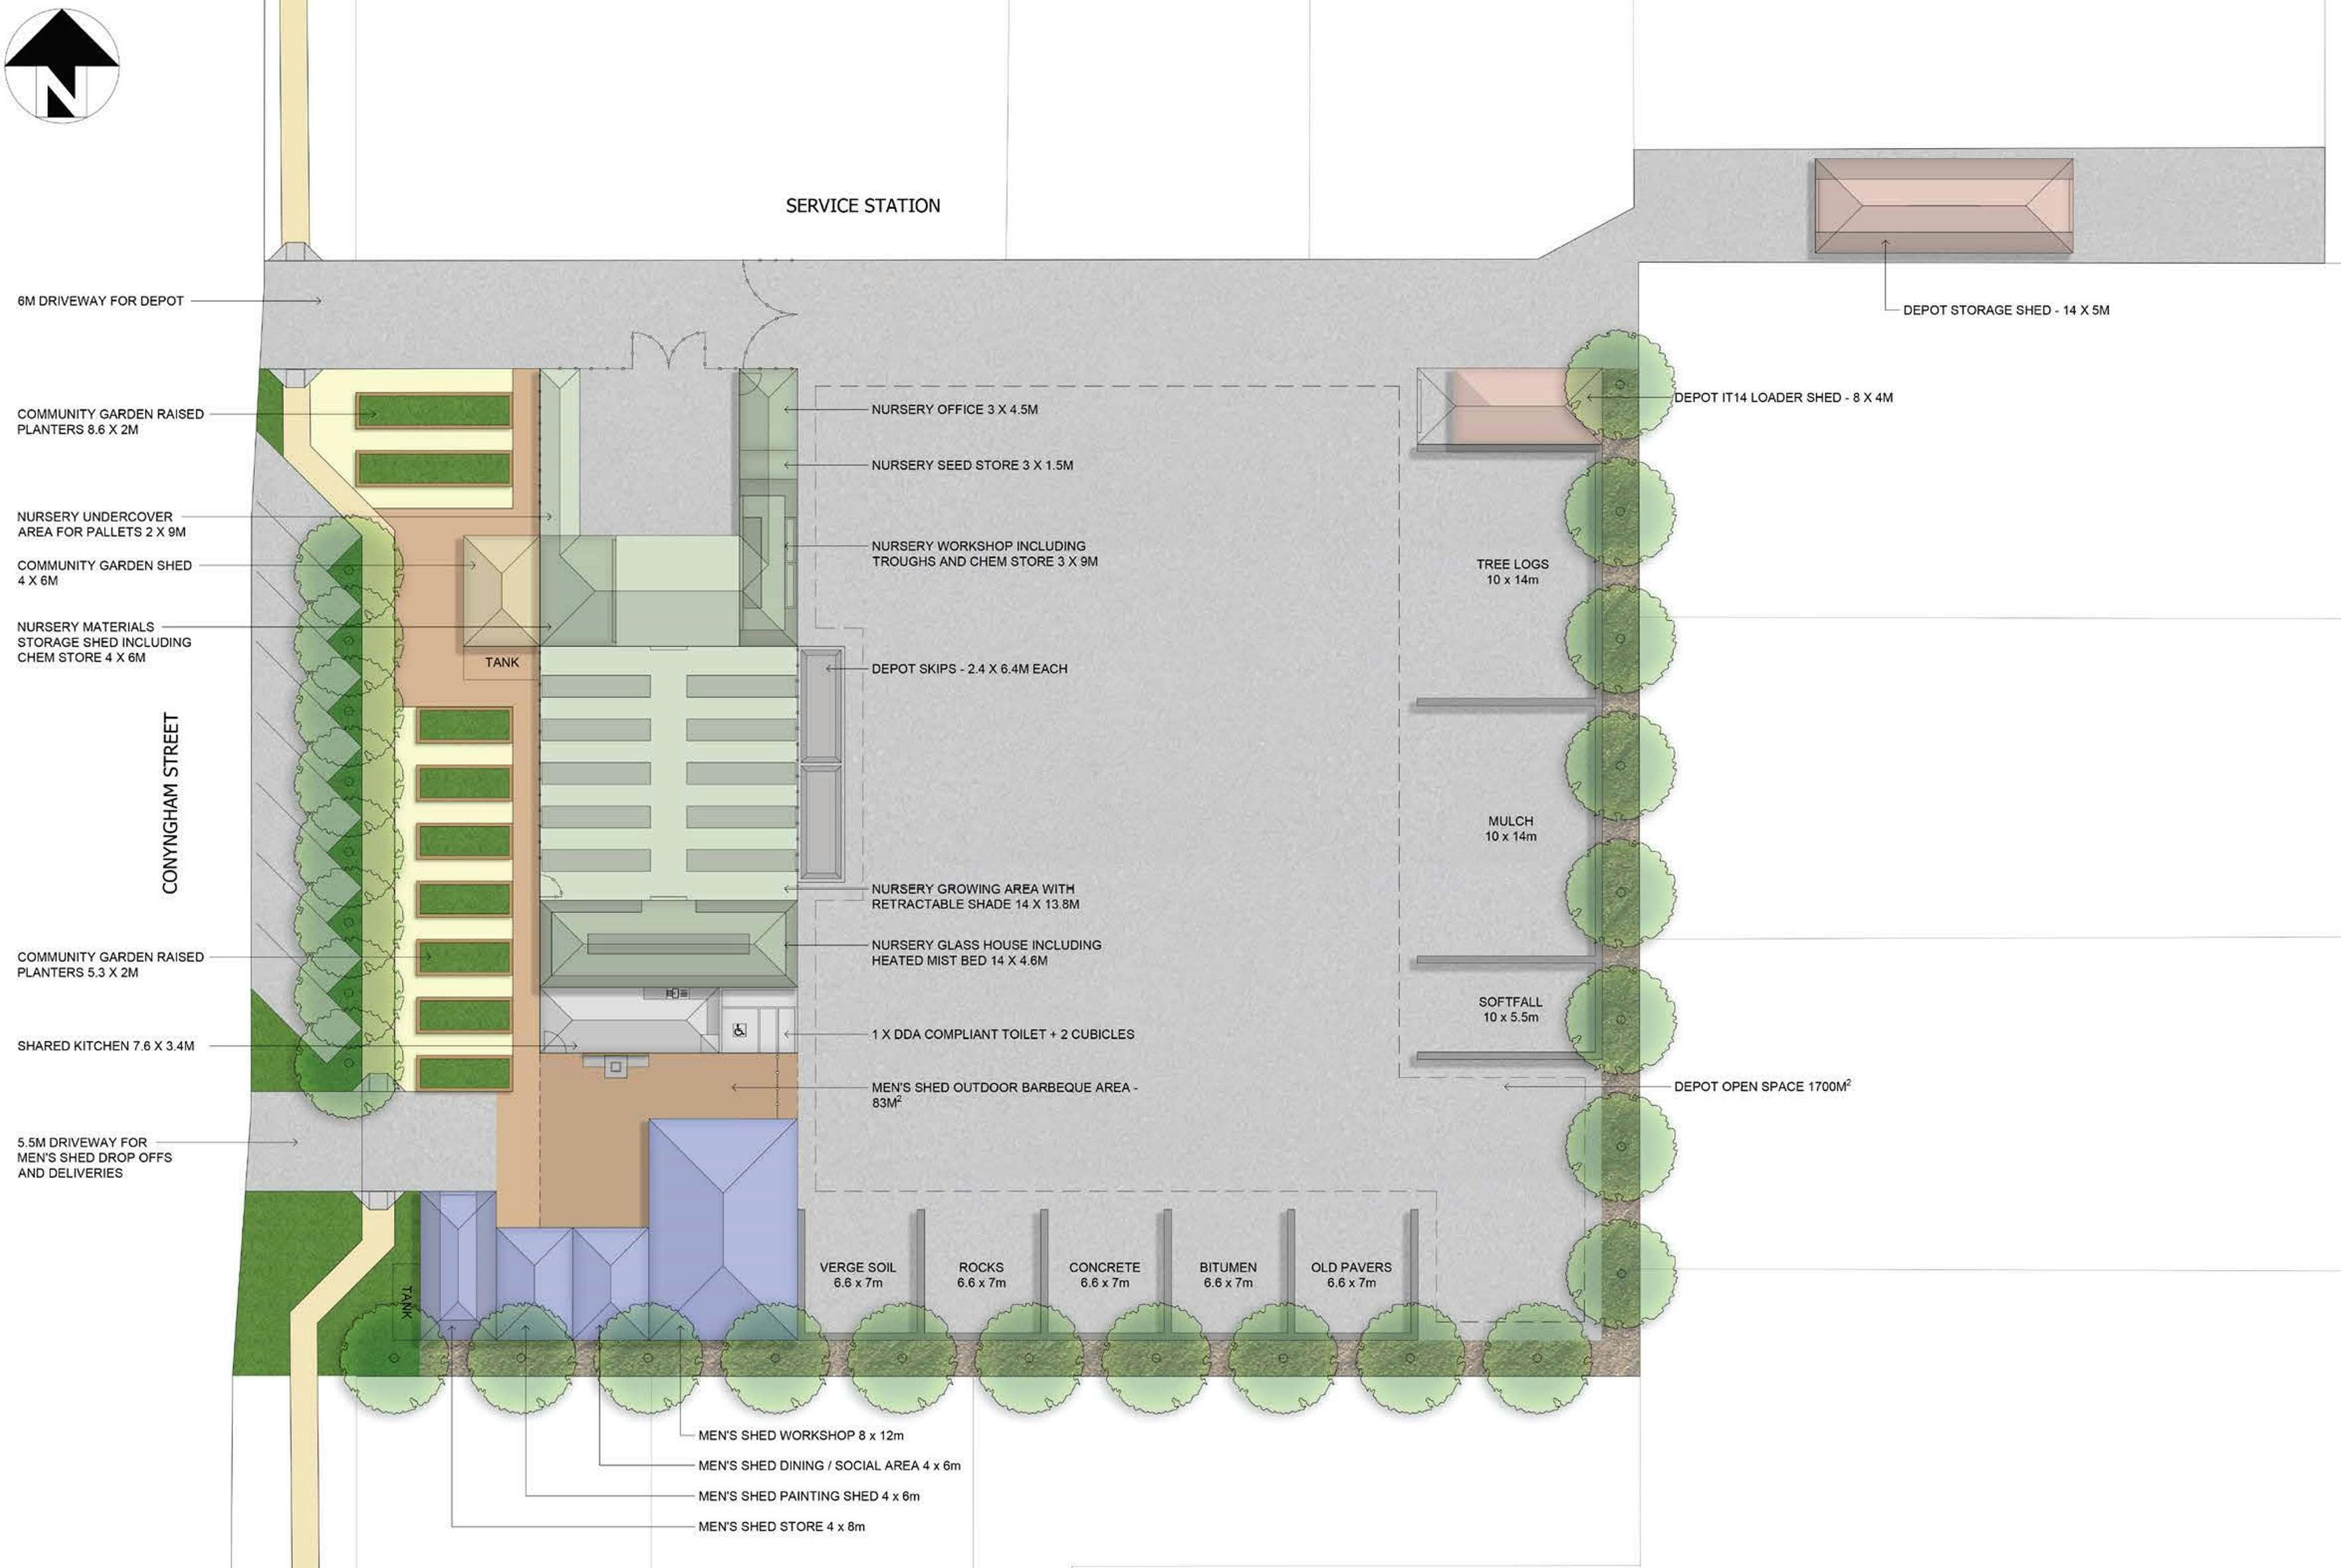 Conyngham Street Depot Master Plan First Concepts